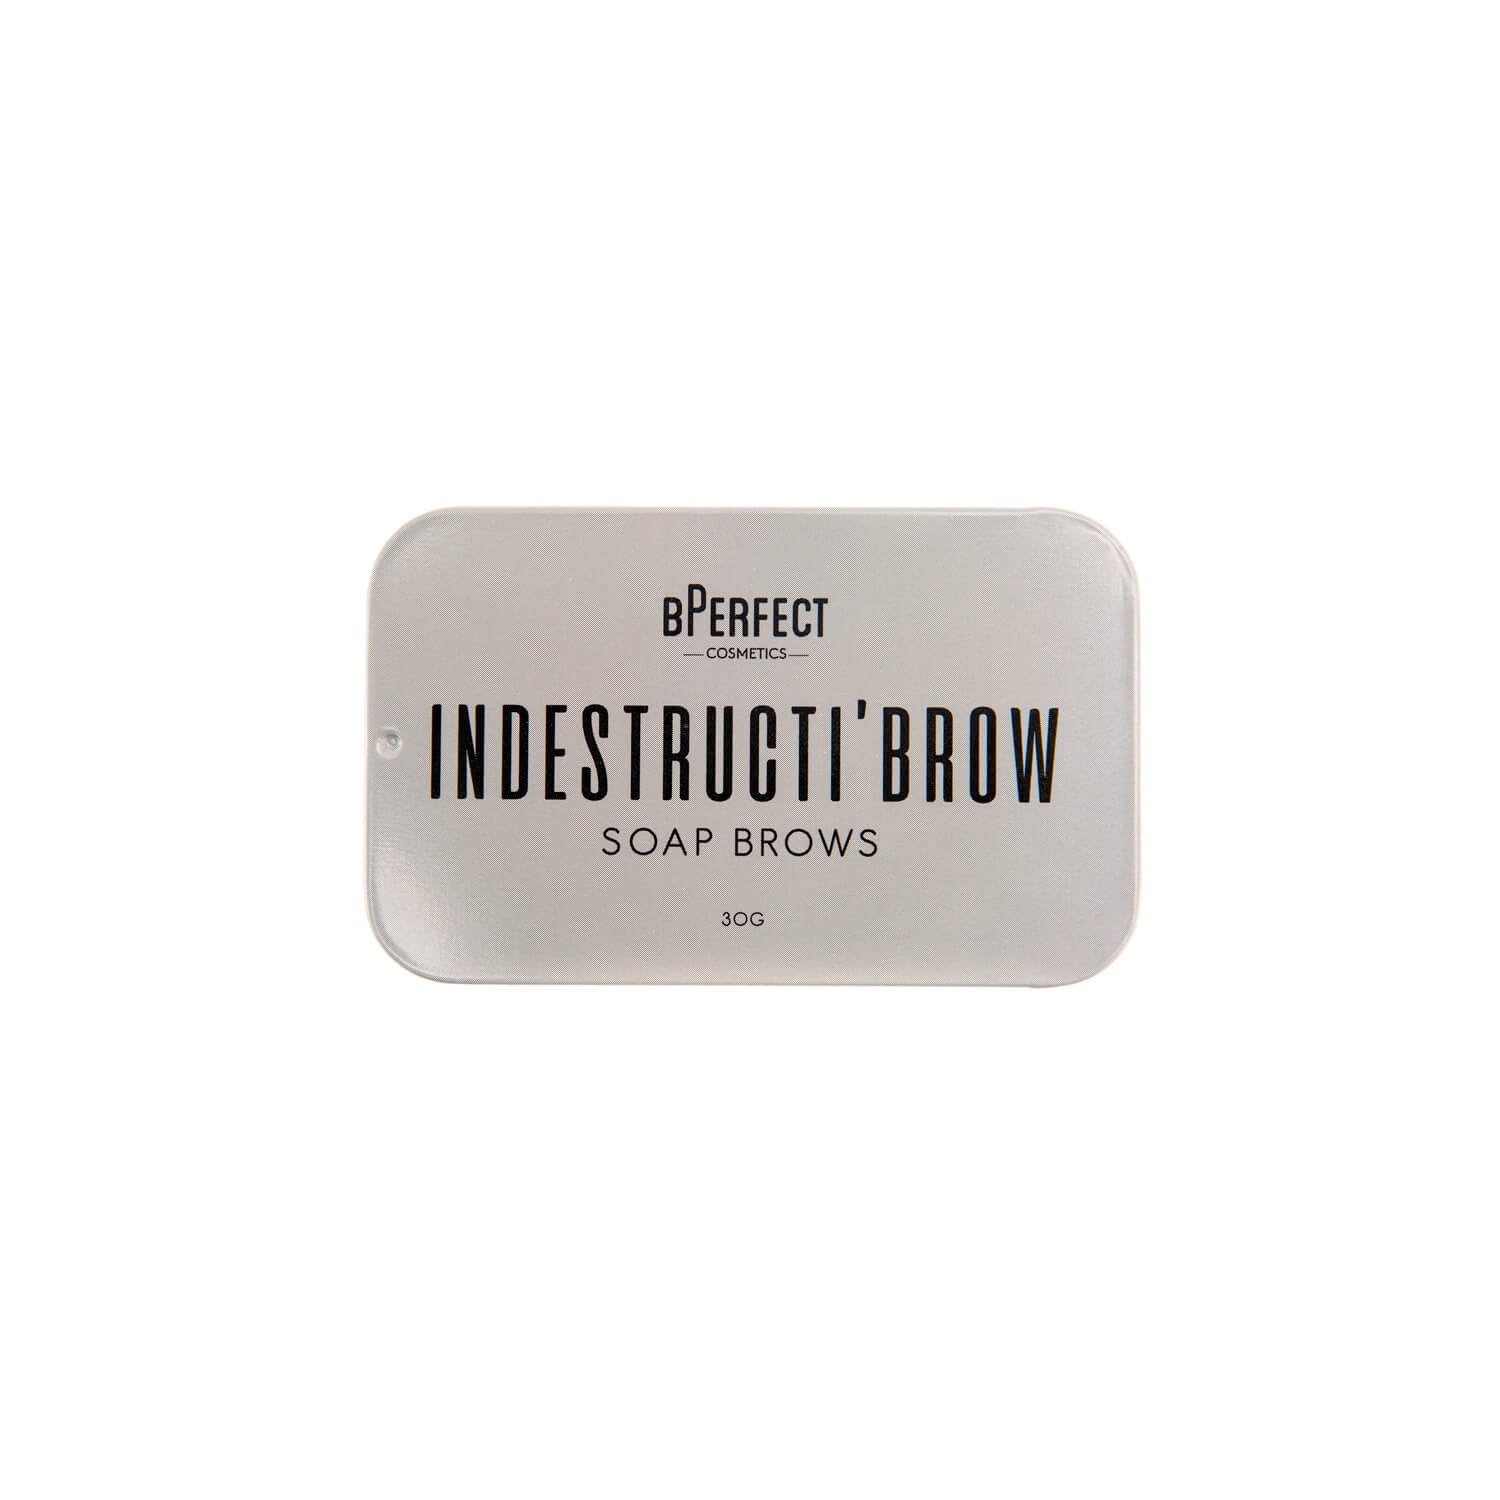 Bperfect Indestructibrow Soap Brows 1 Shaws Department Stores